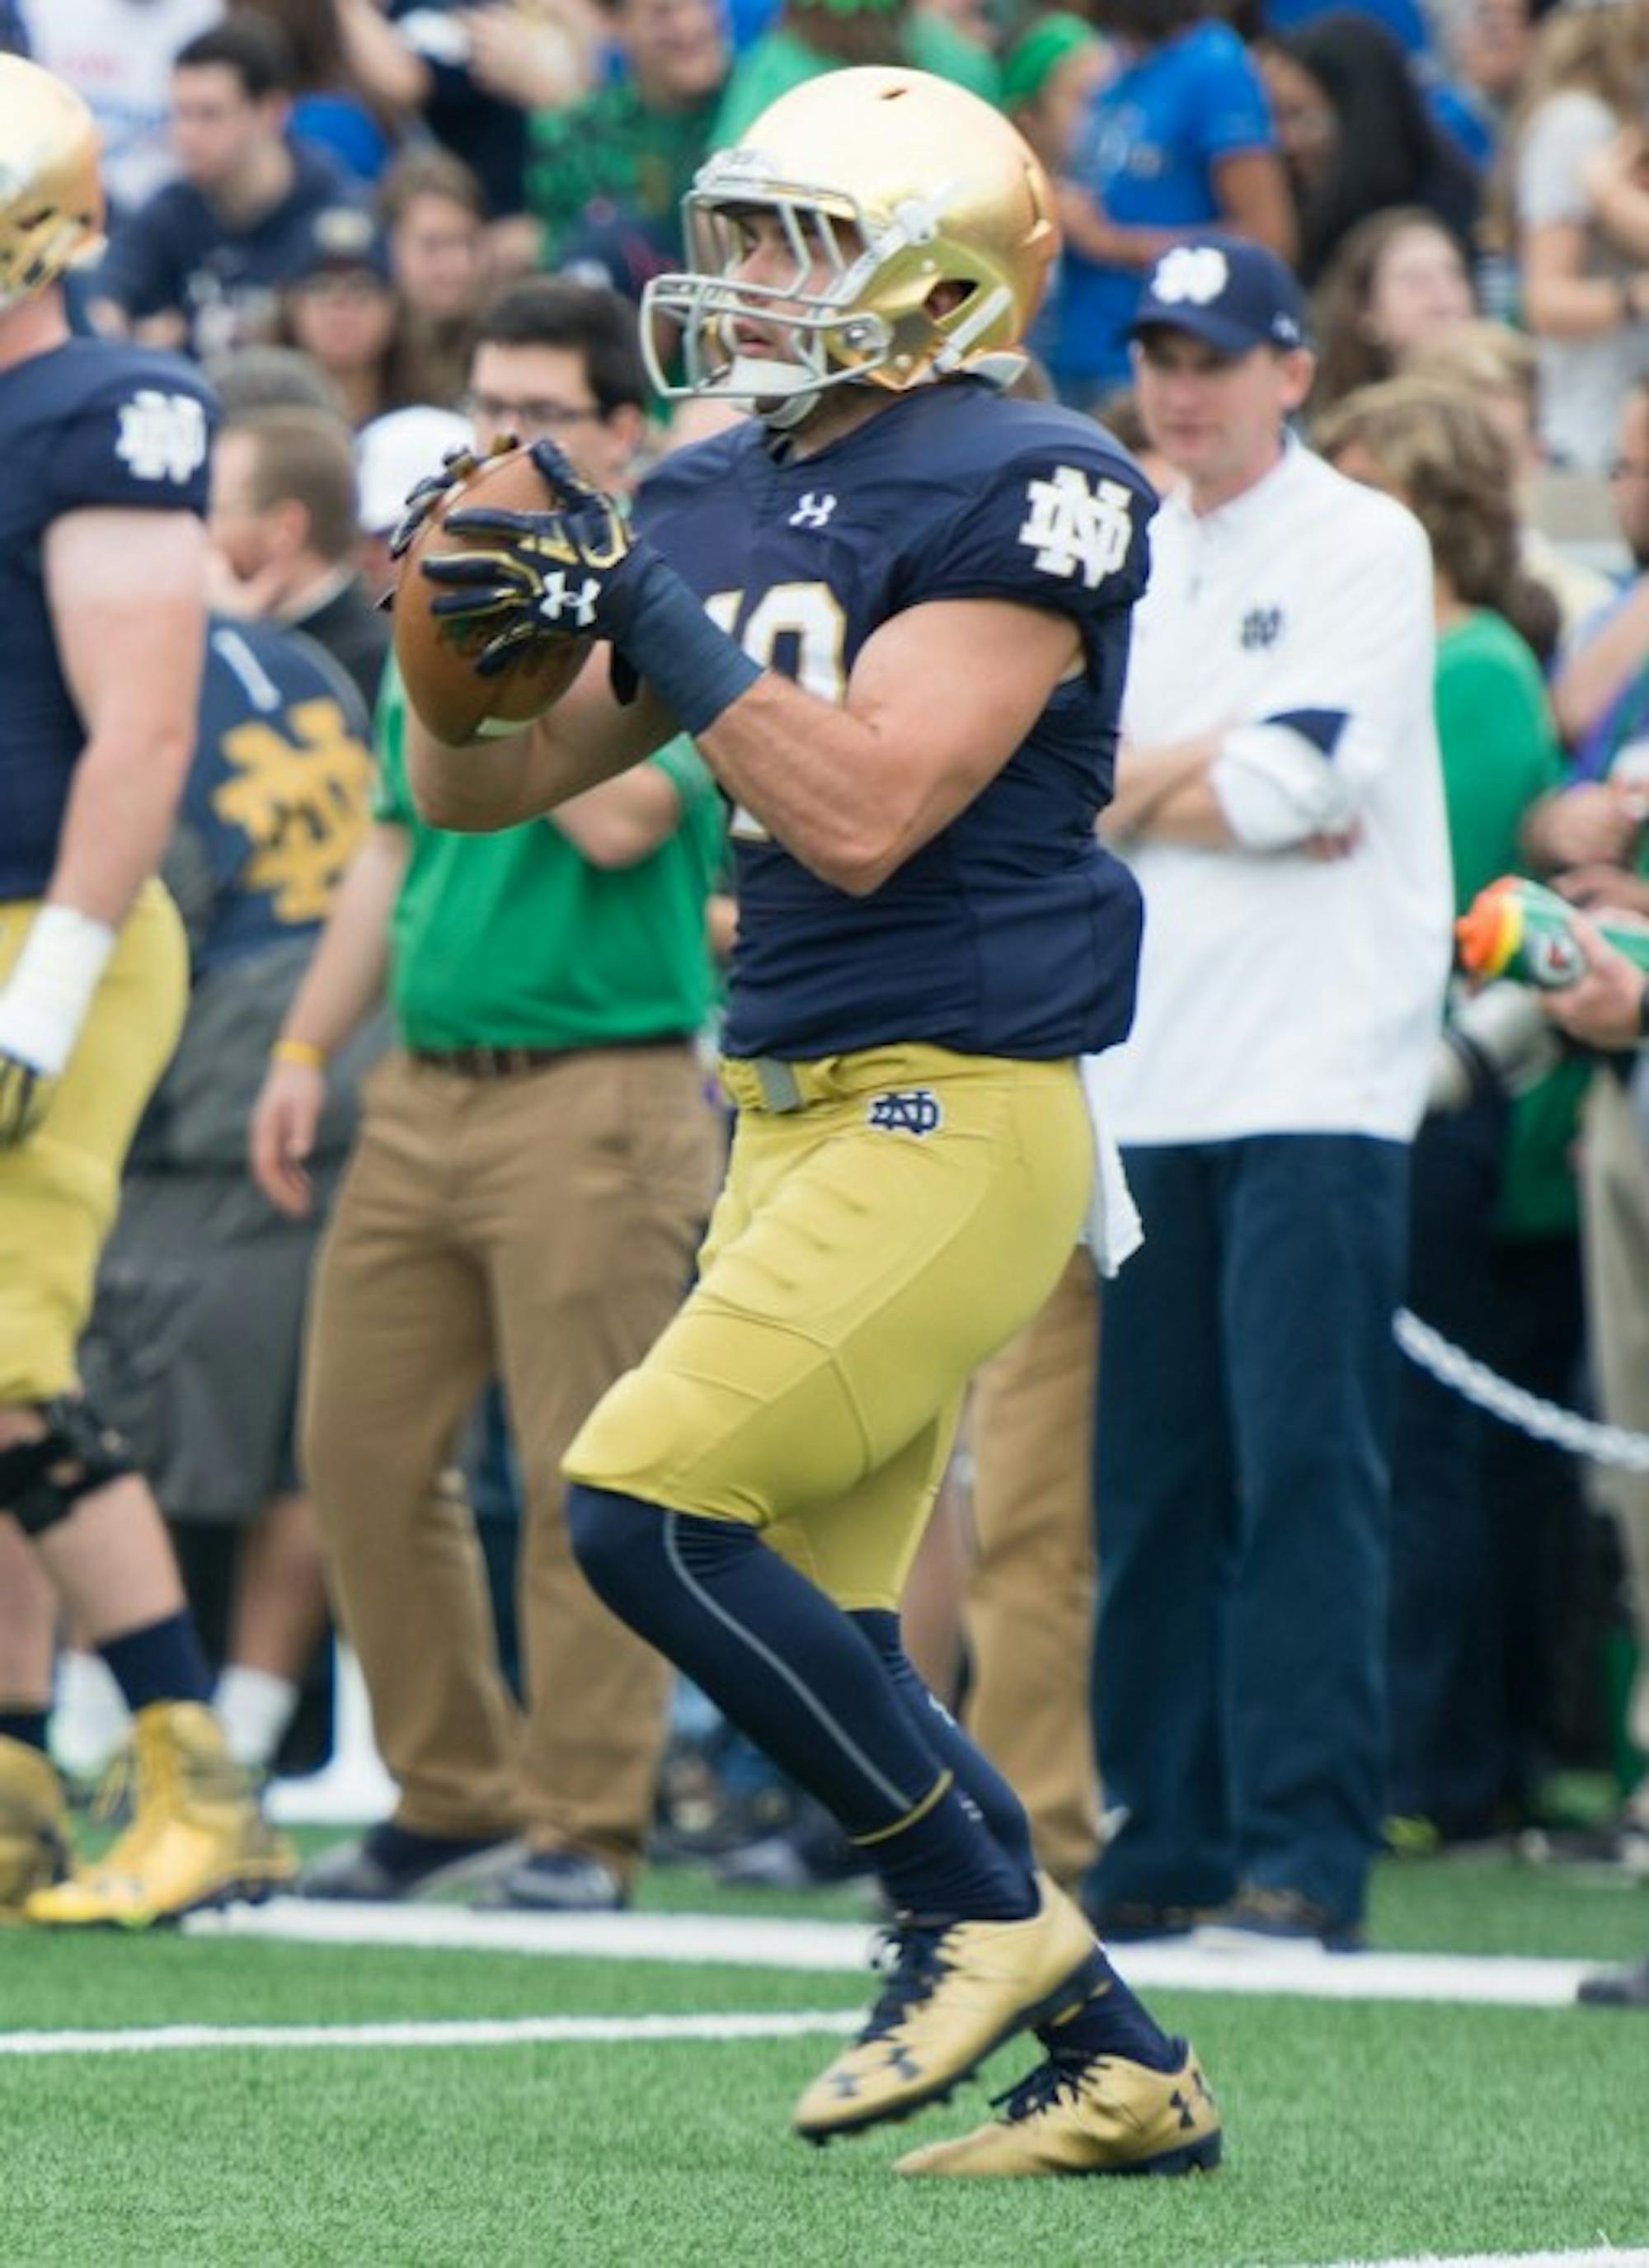 Irish senior running back Bailey Ross warms up before Notre Dame’s game against Miami. Ross is a walk-on along with his brother, Austin.